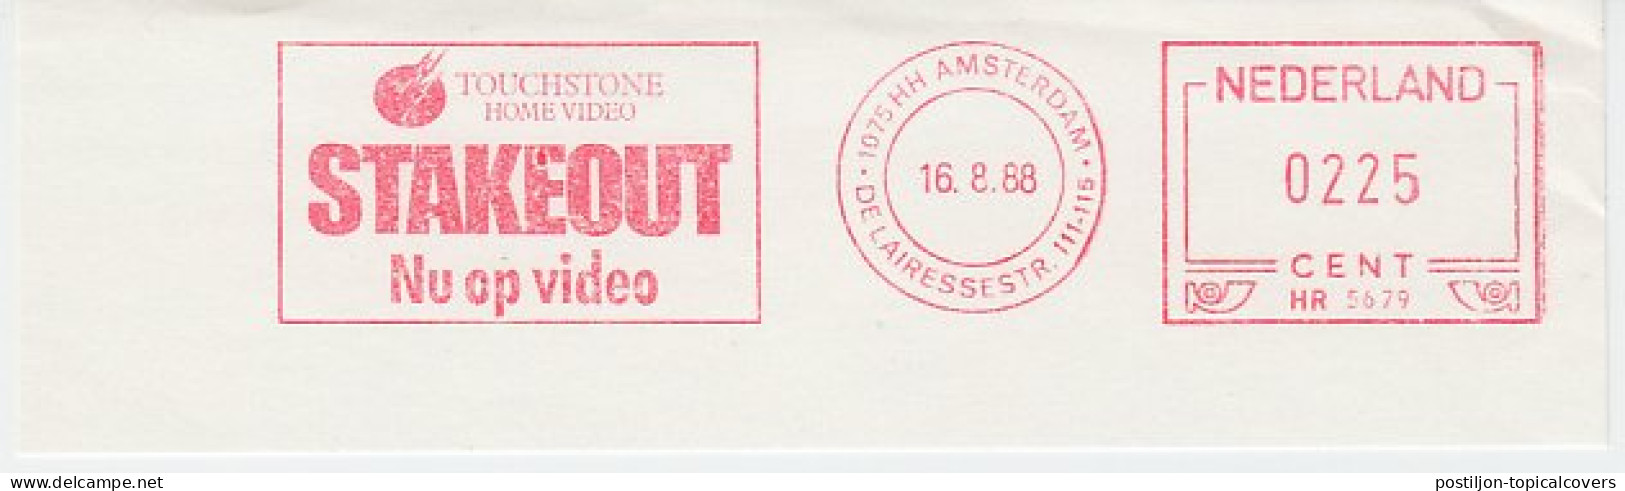 Meter Cut Netherlands 1988 Stakeout - Movie - Cinéma